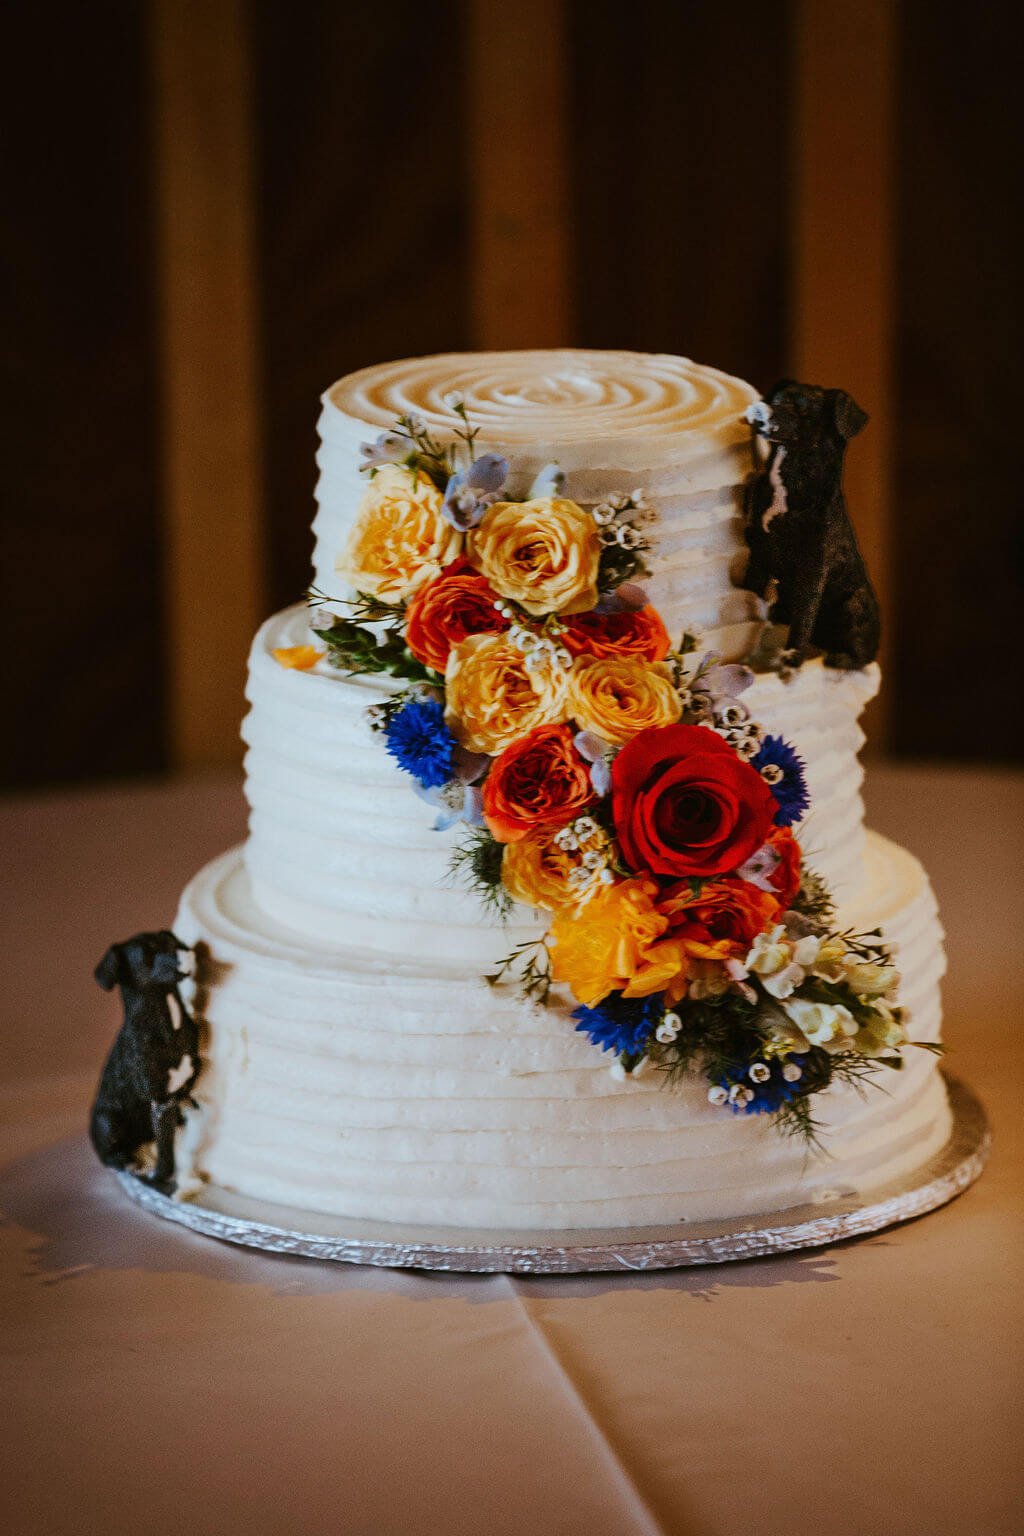 Wedding cake with vibrant flowers and two dog figurines that look like they're eating the cake